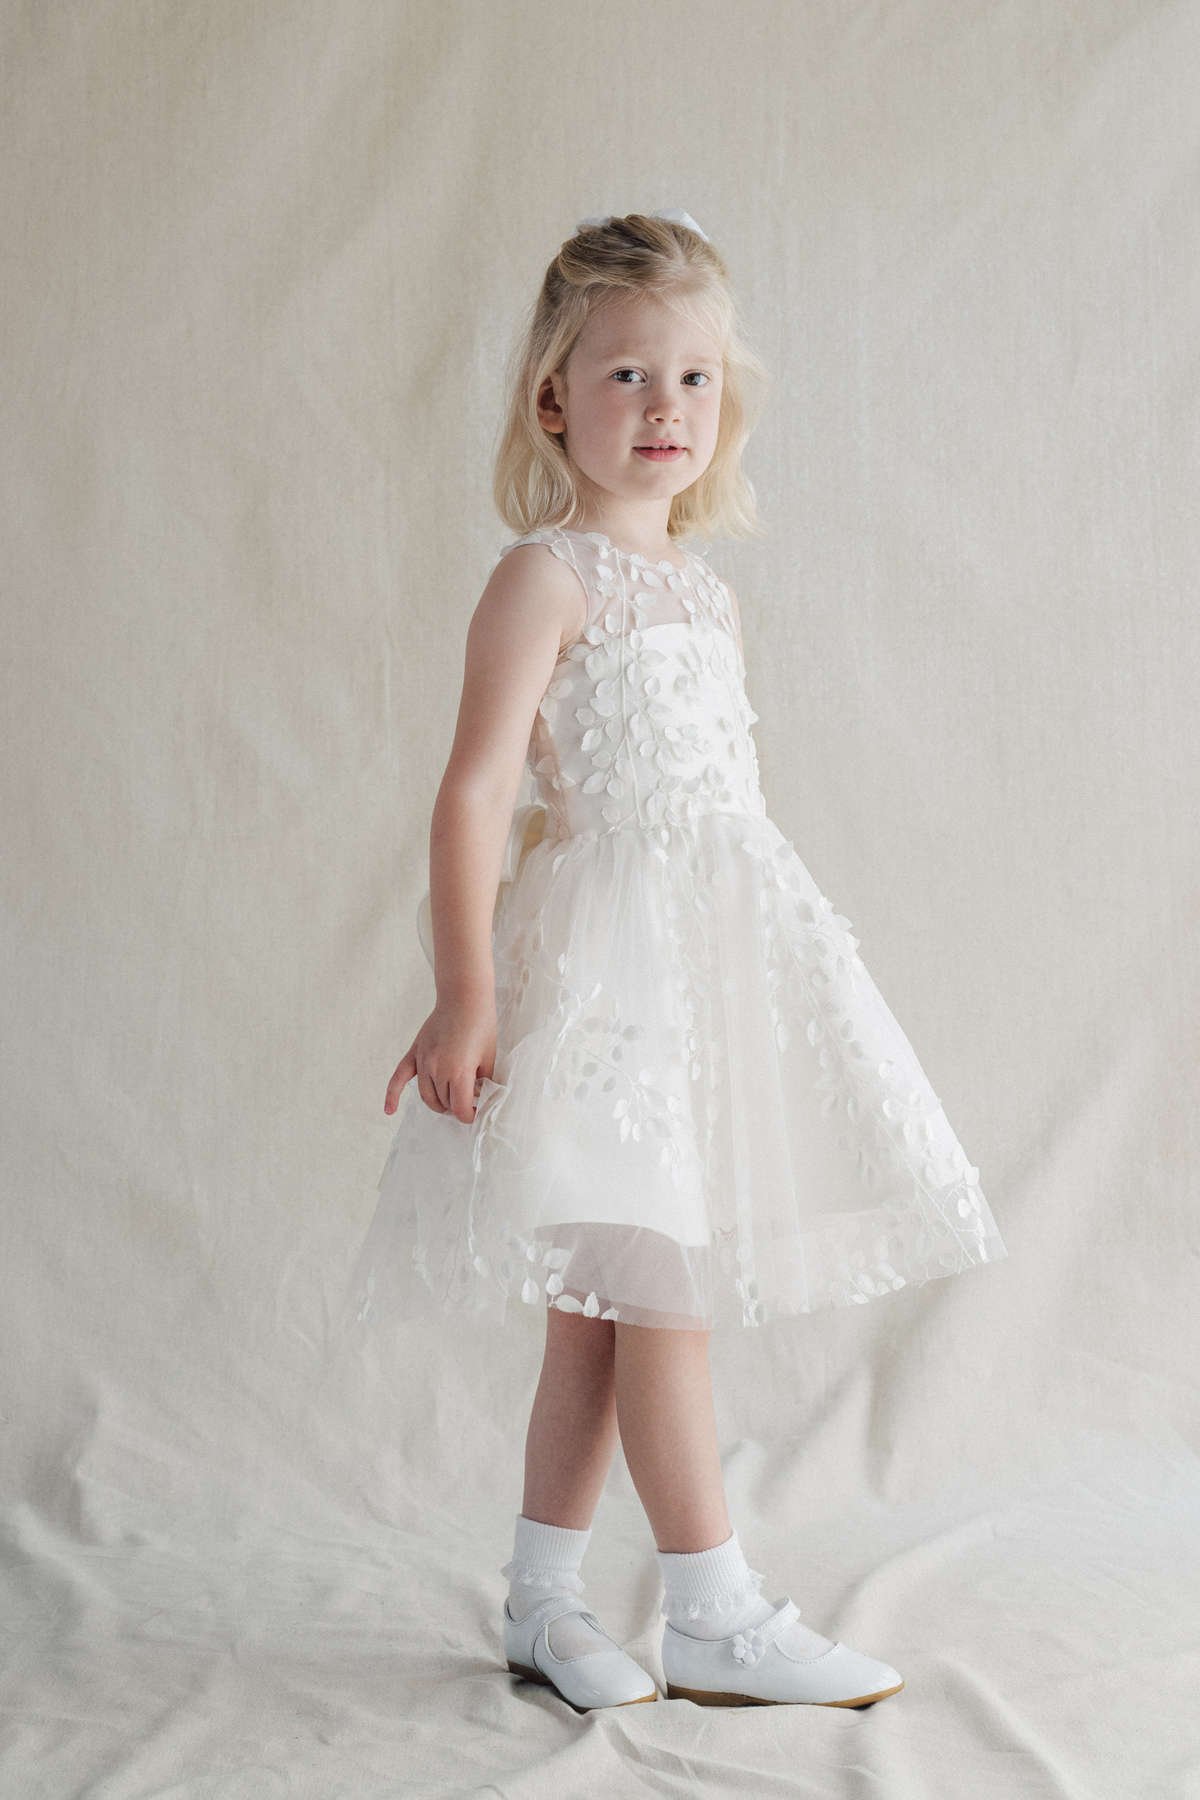 2023 Flower girl Dresses by Anne Barge to complement your Bridal Gown